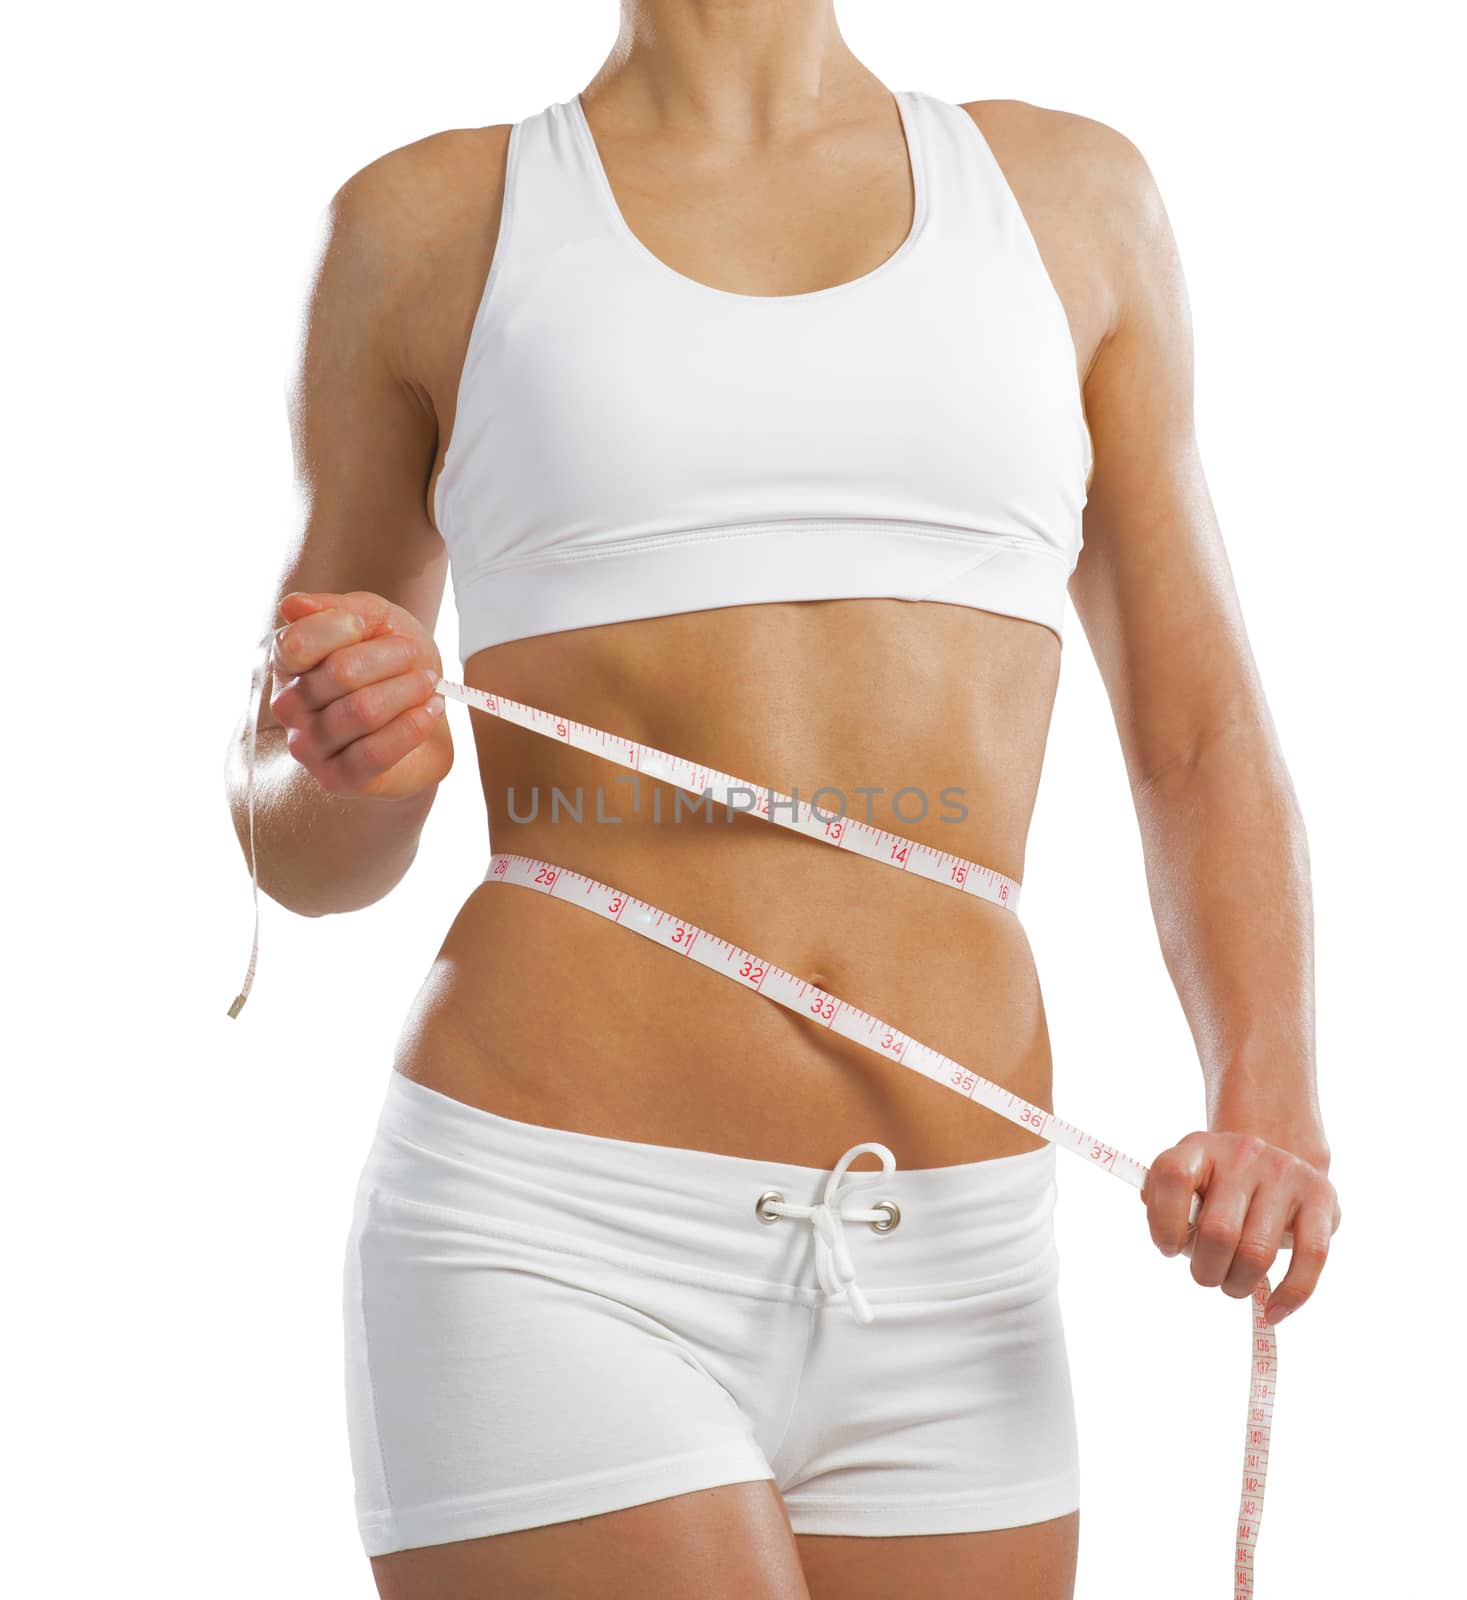 young athletic woman measuring waist measuring tape, isolated on white background